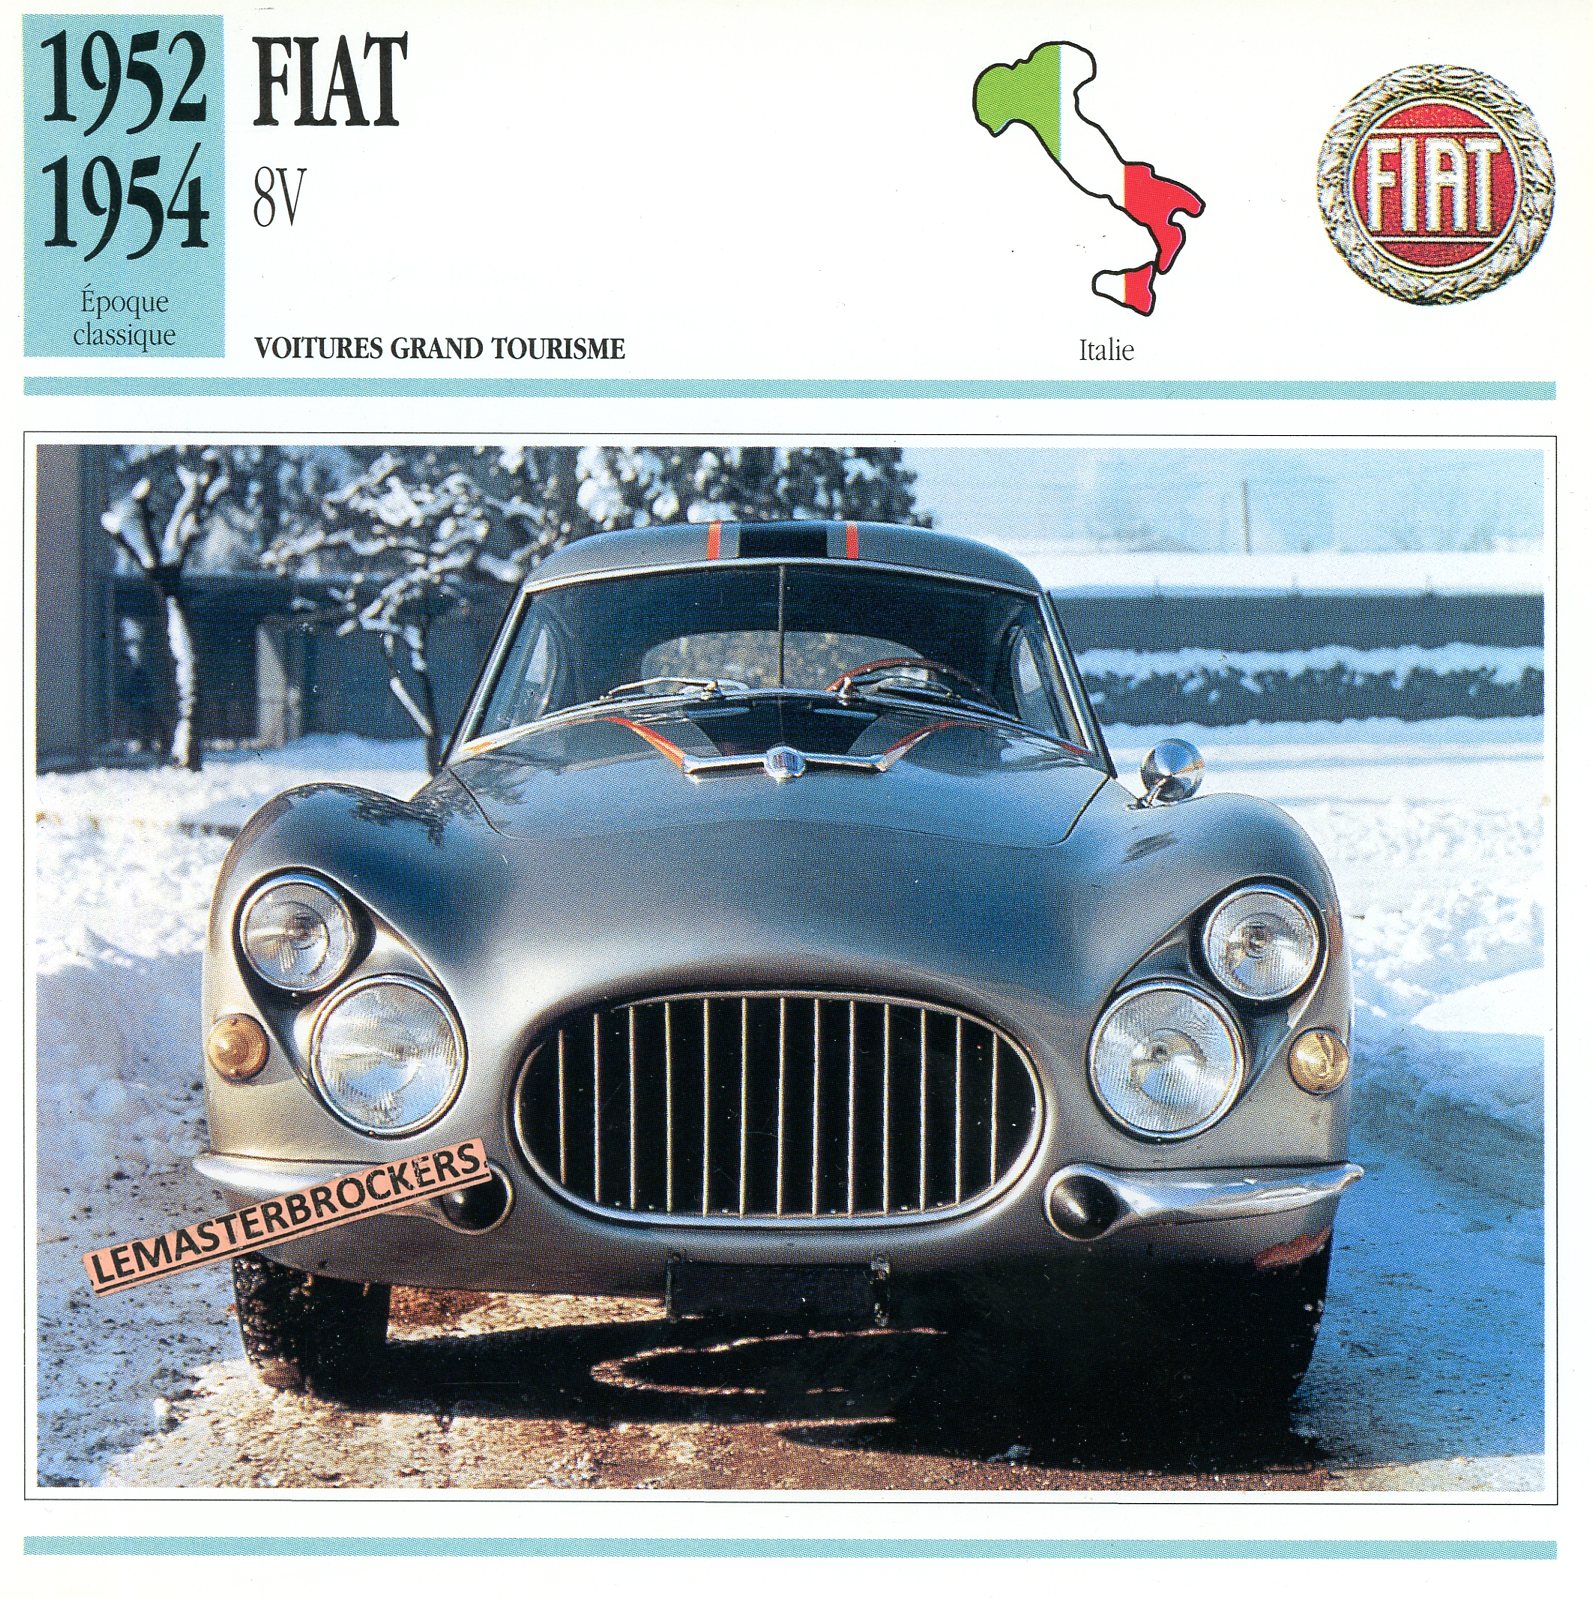 FIAT-8V-1954-FICHE-AUTO-CARD-CARS-LEMASTERBROCKERS